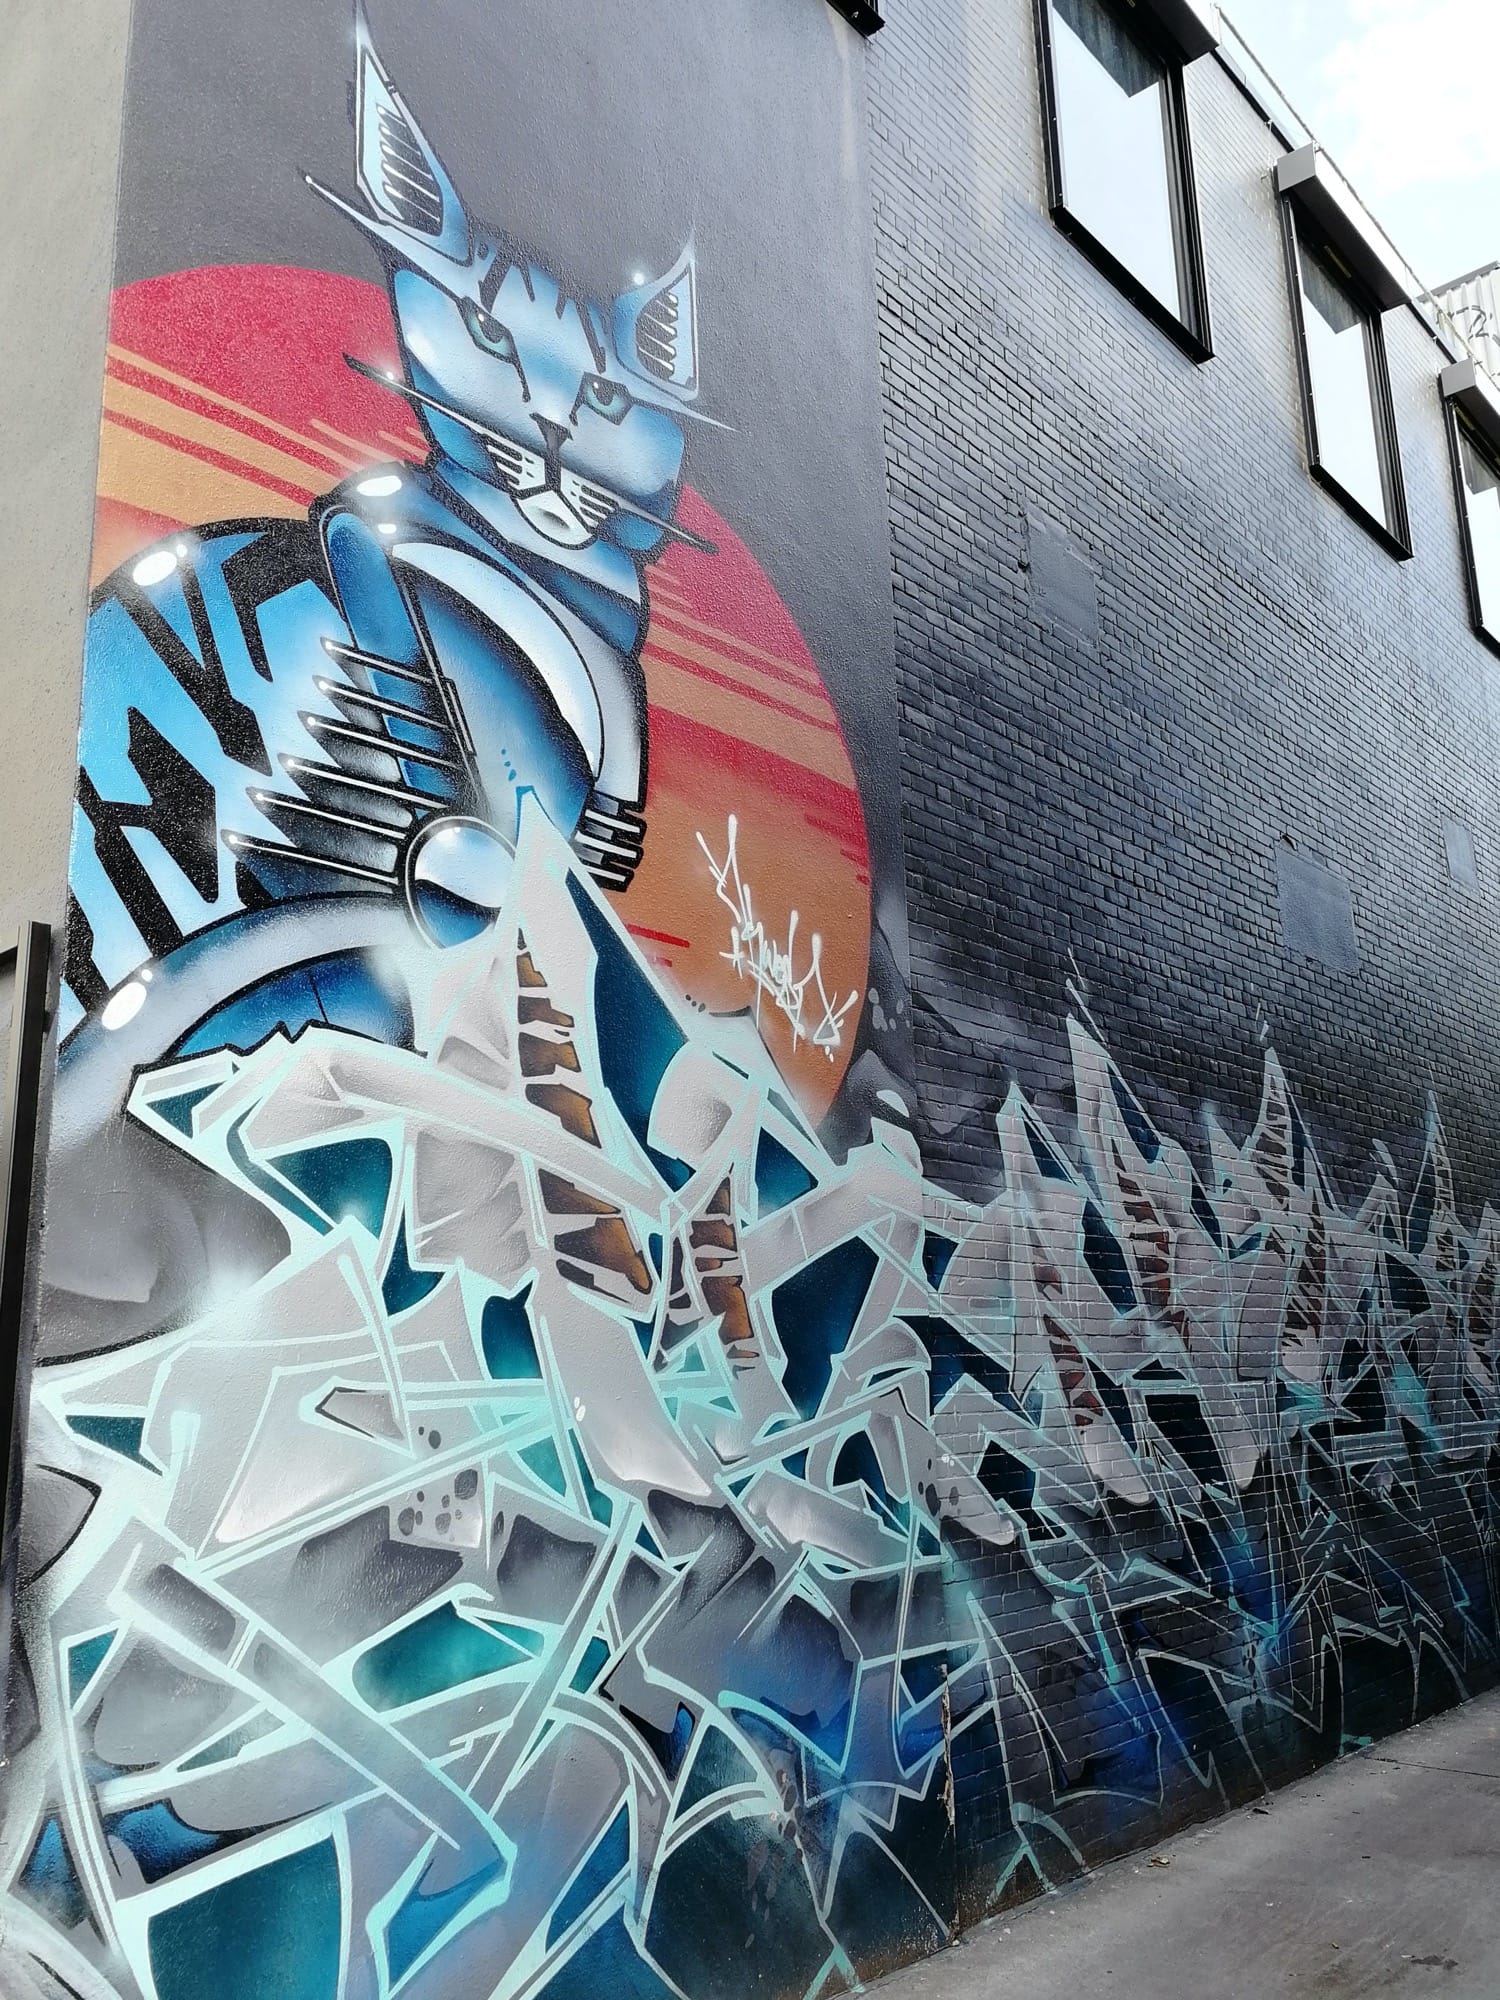 Graffiti 2379  captured by Rabot in Toronto Canada